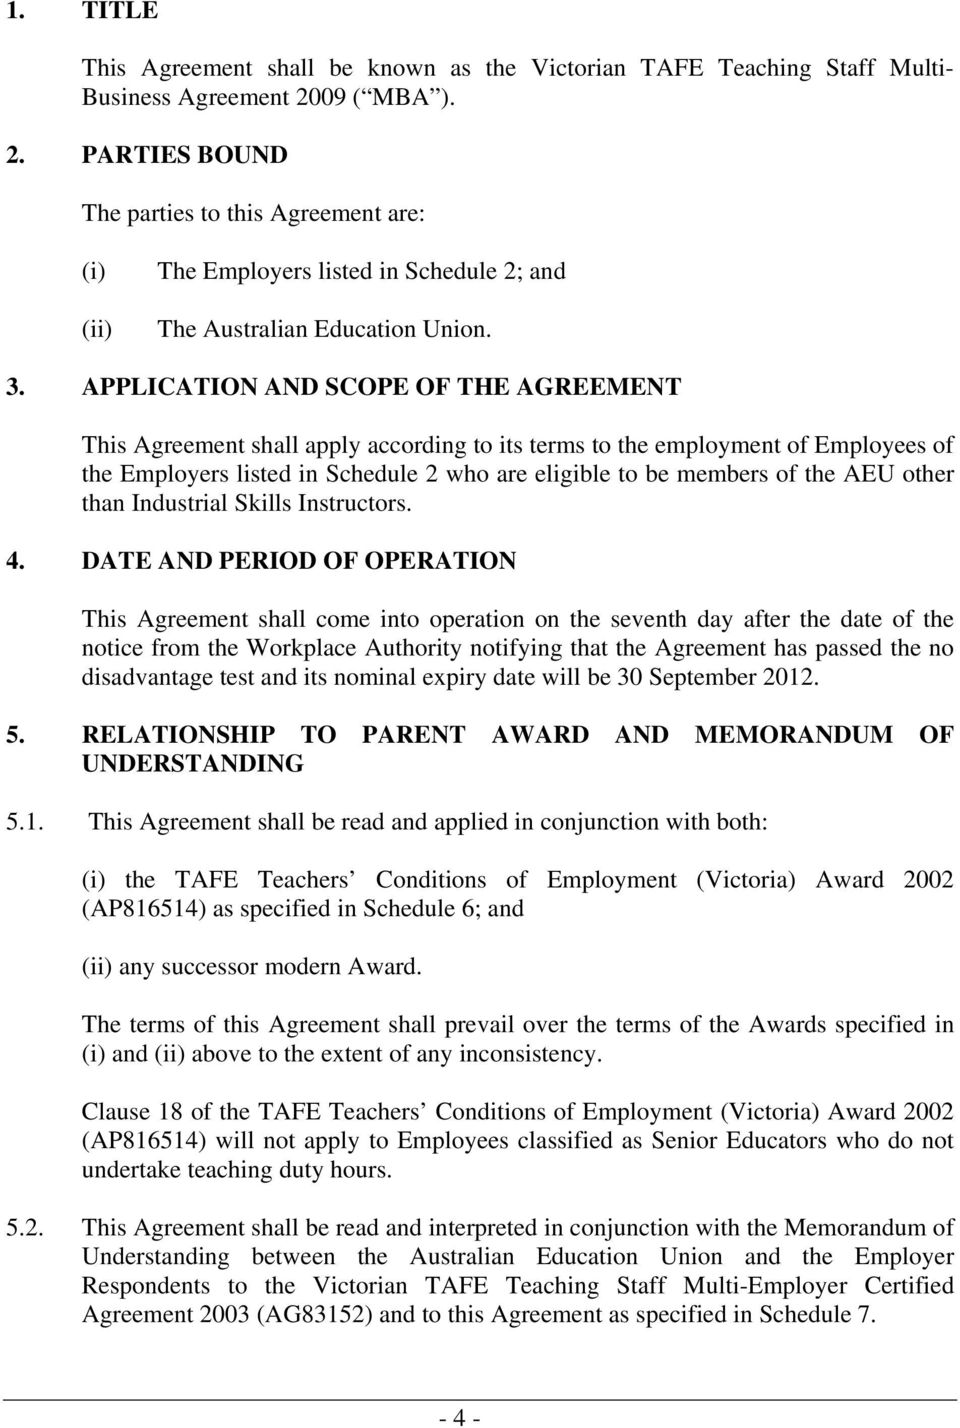 APPLICATION AND SCOPE OF THE AGREEMENT This Agreement shall apply according to its terms to the employment of Employees of the Employers listed in Schedule 2 who are eligible to be members of the AEU